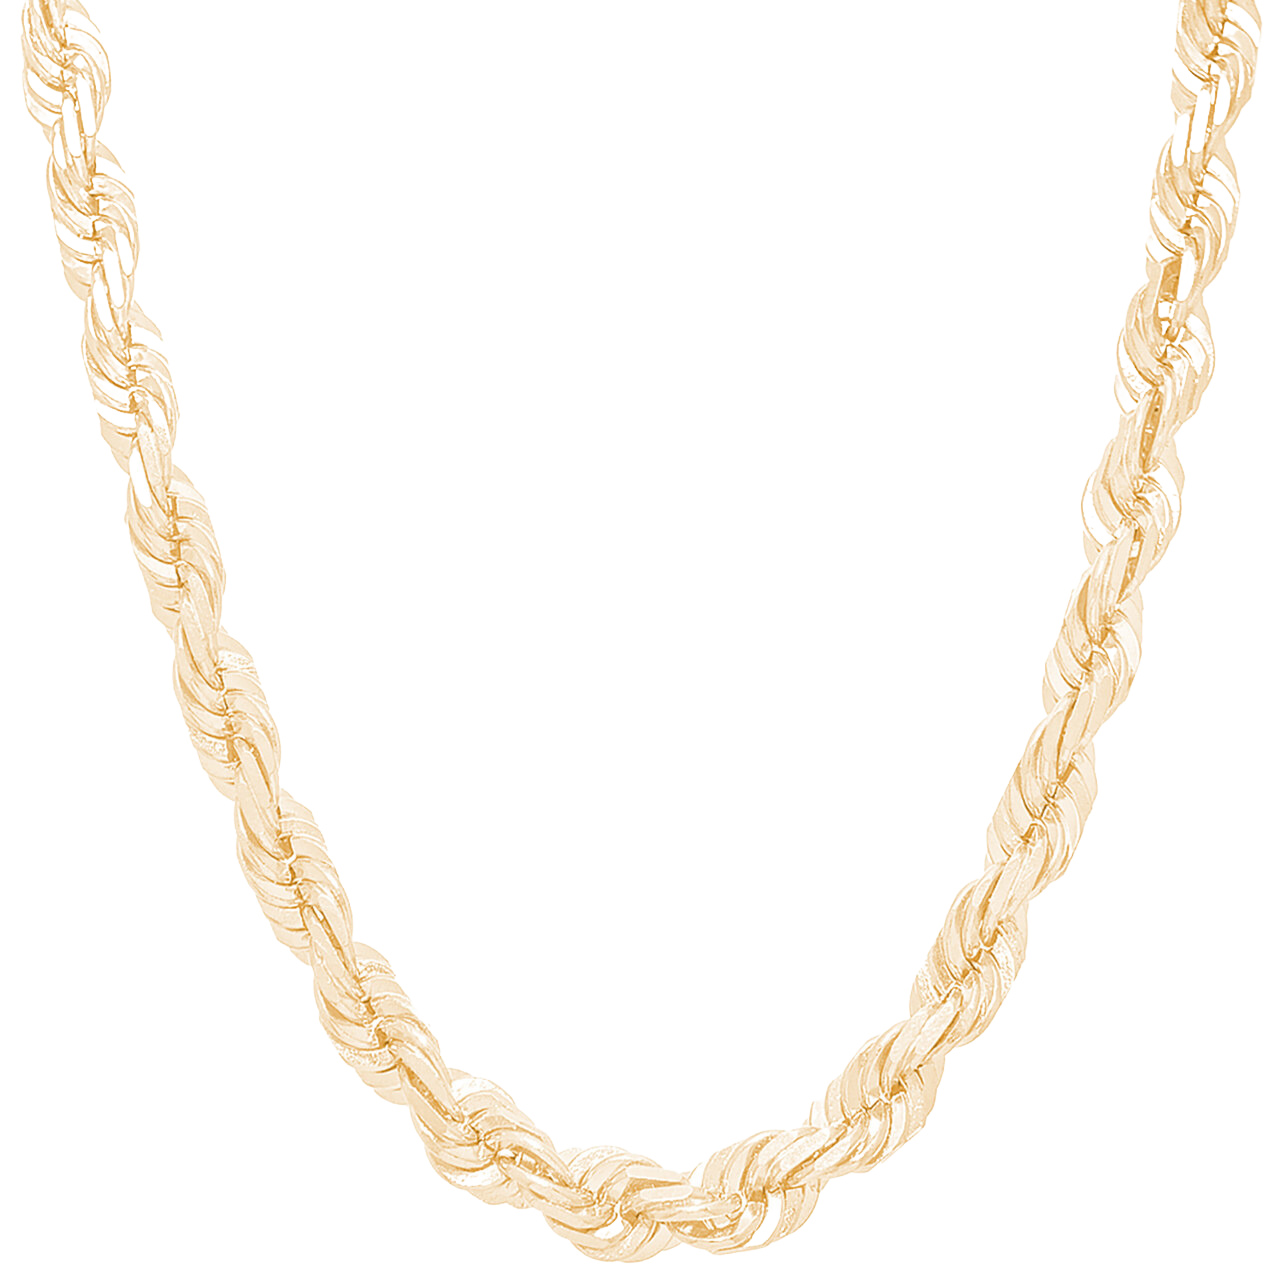 Solid Diamond Cut Rope Chain - 14kt - 7mm - 24"